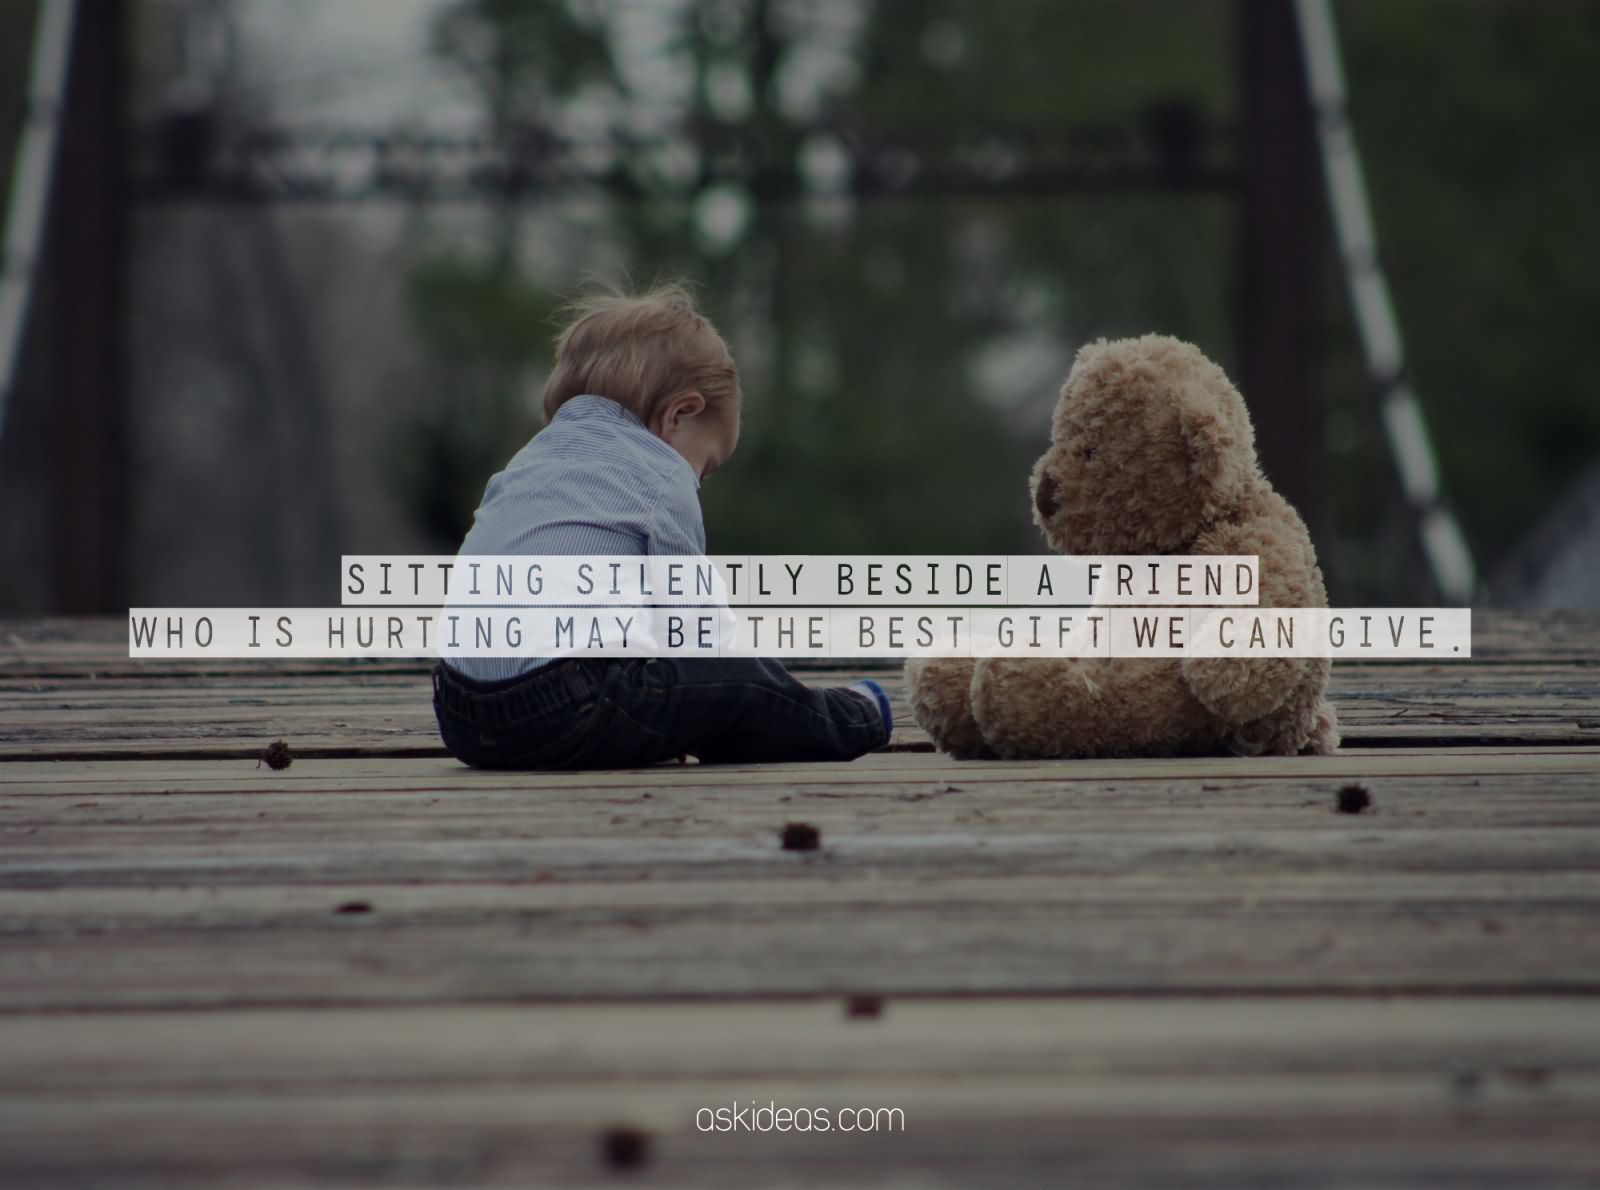 Sitting silently beside a friend who is hurting may be the best gift we can give.